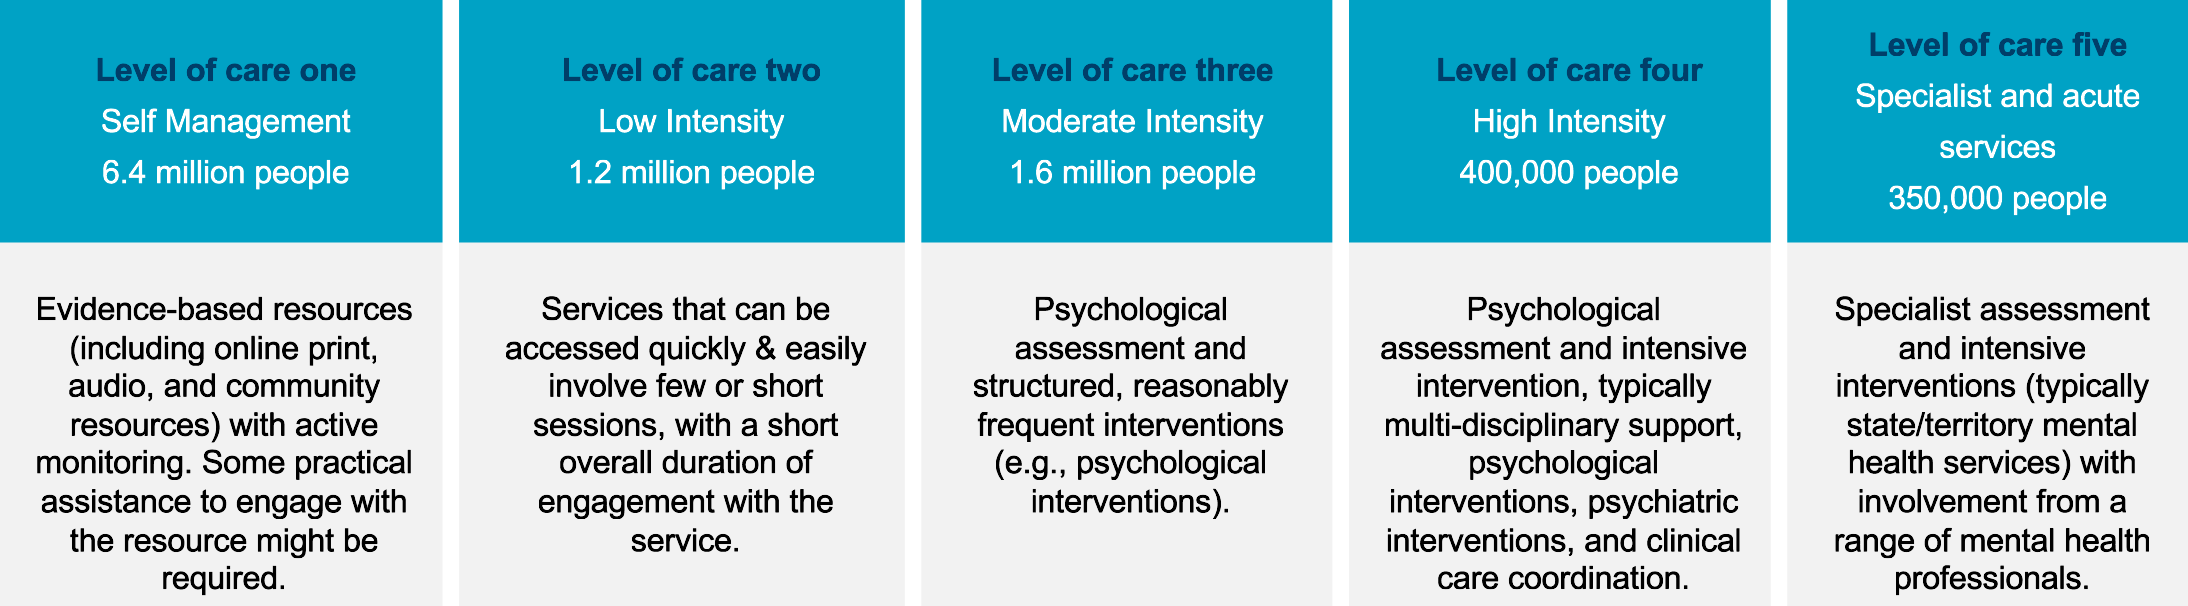 5 levels of care